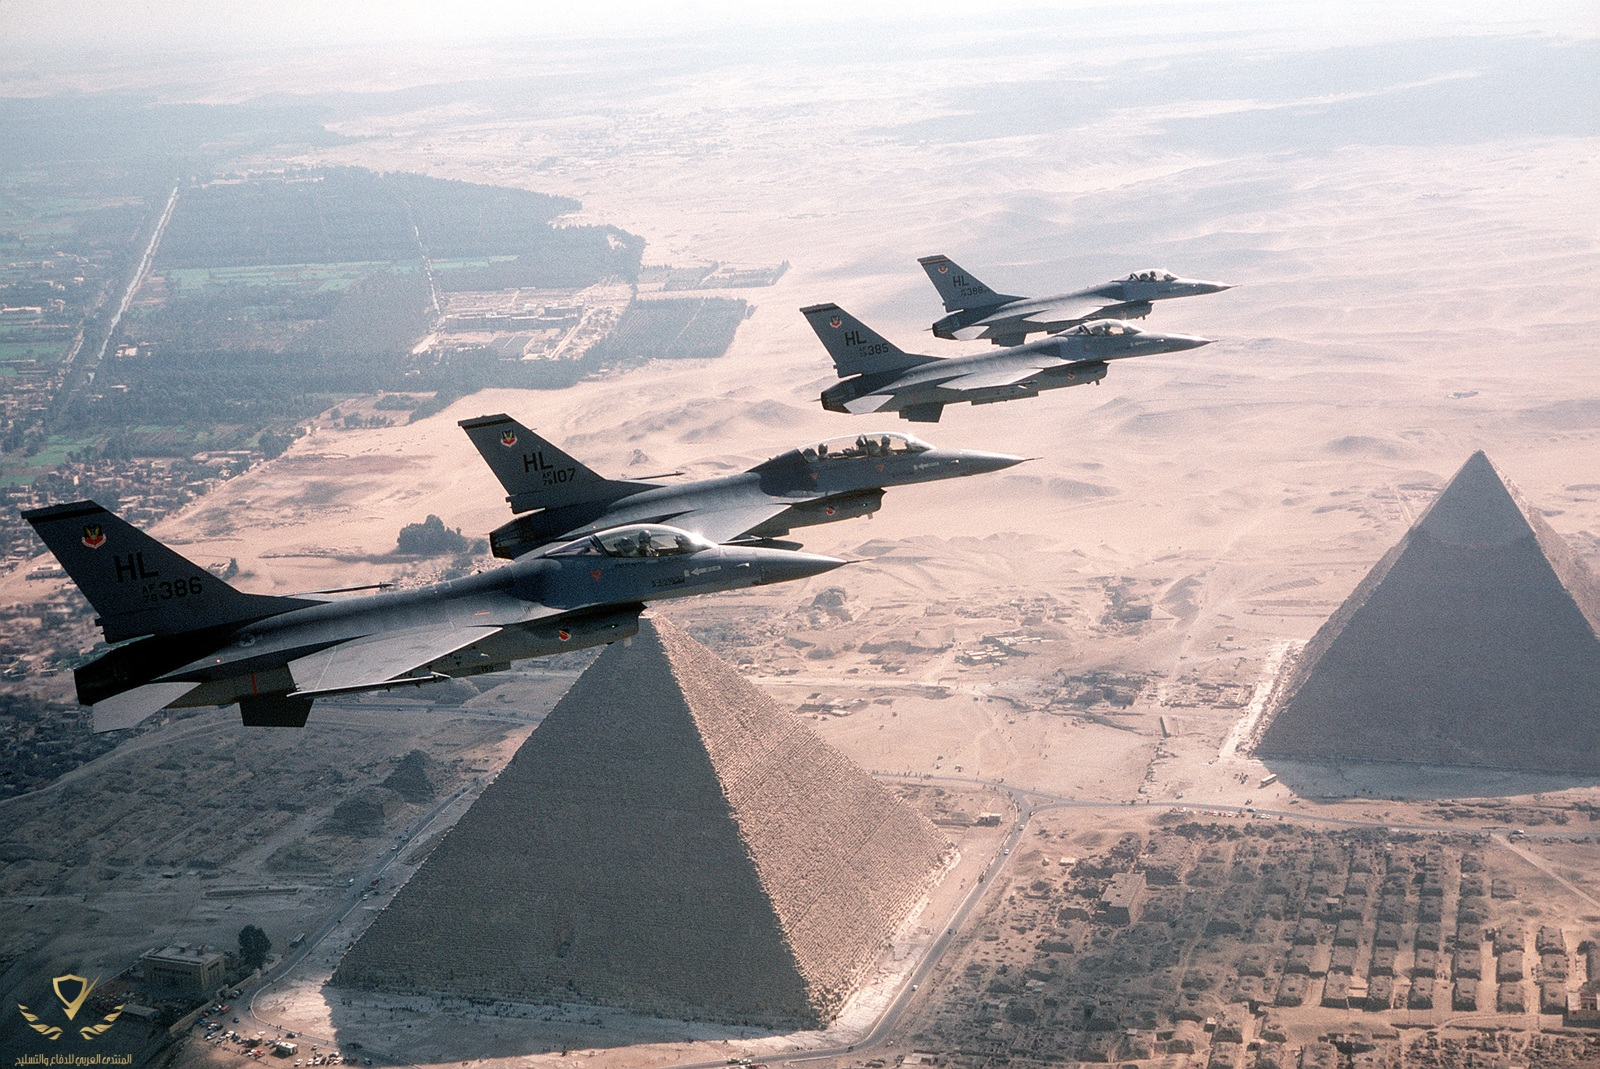 a-right-side-view-of-a-formation-of-four-f-16-fighting-falcon-aircraft-in-flight-430ce0-1600.jpg